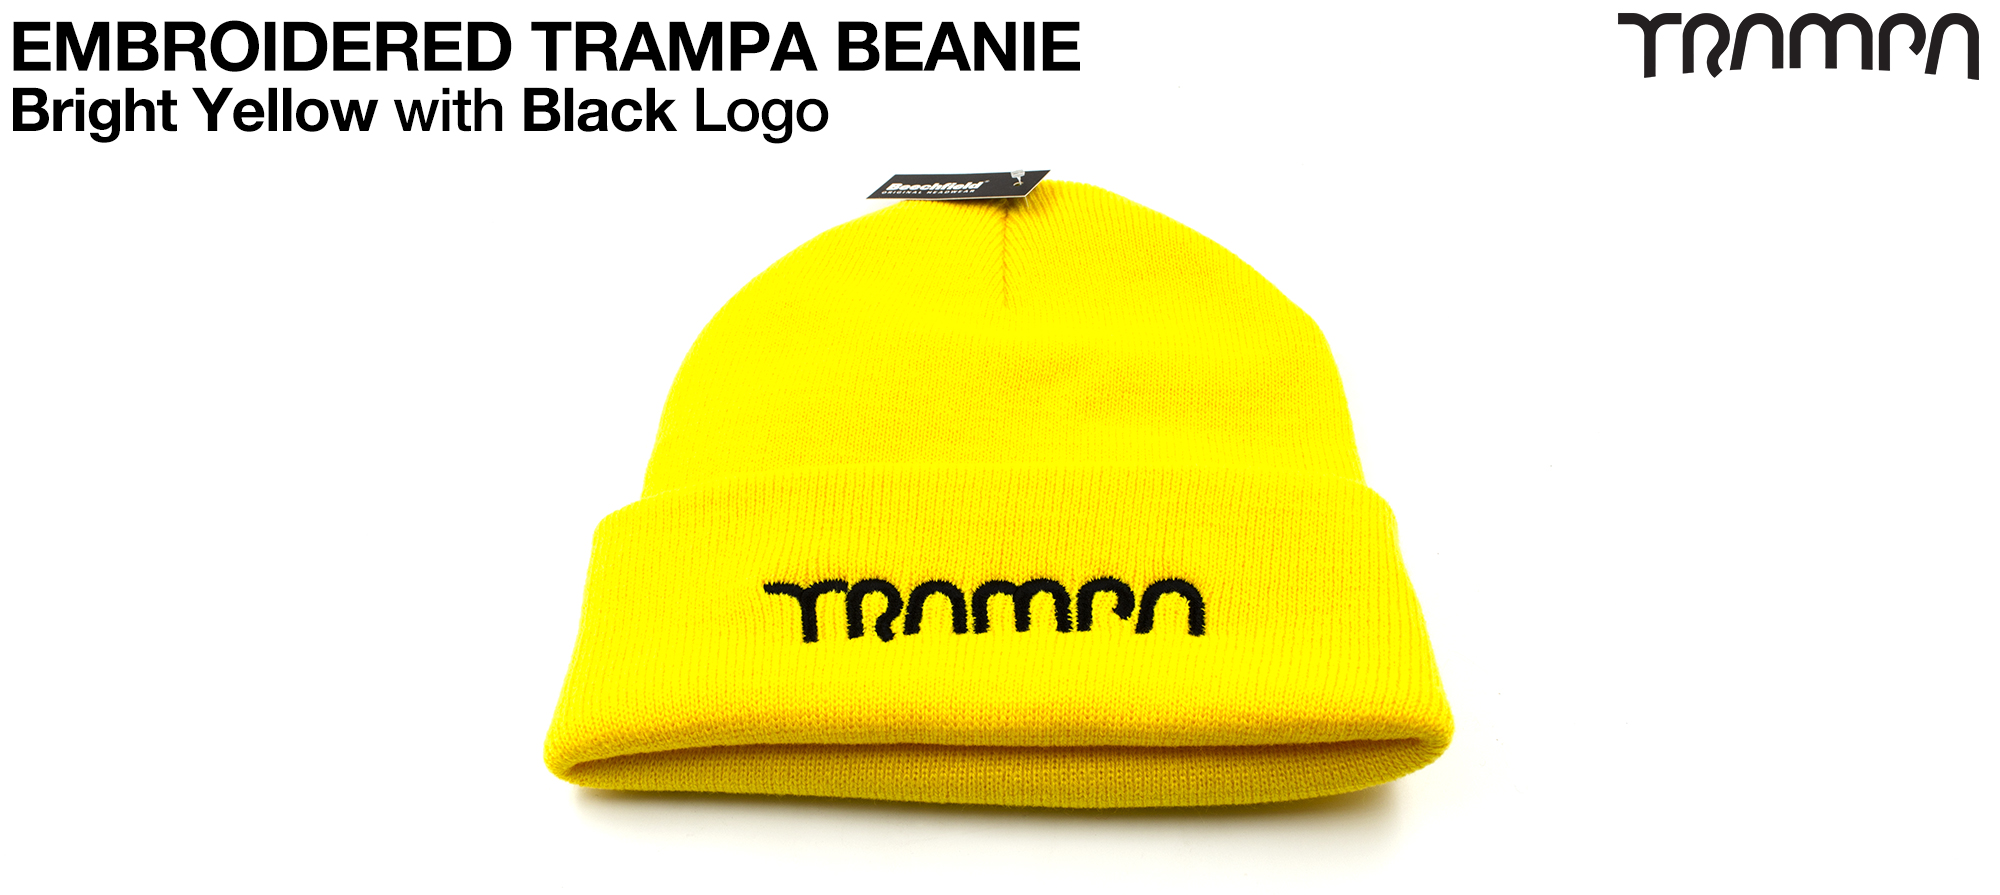 Bright YELLOW Beanie with BLACK Embroidered TRAMPA logo - Double thick turn over for extra warmth